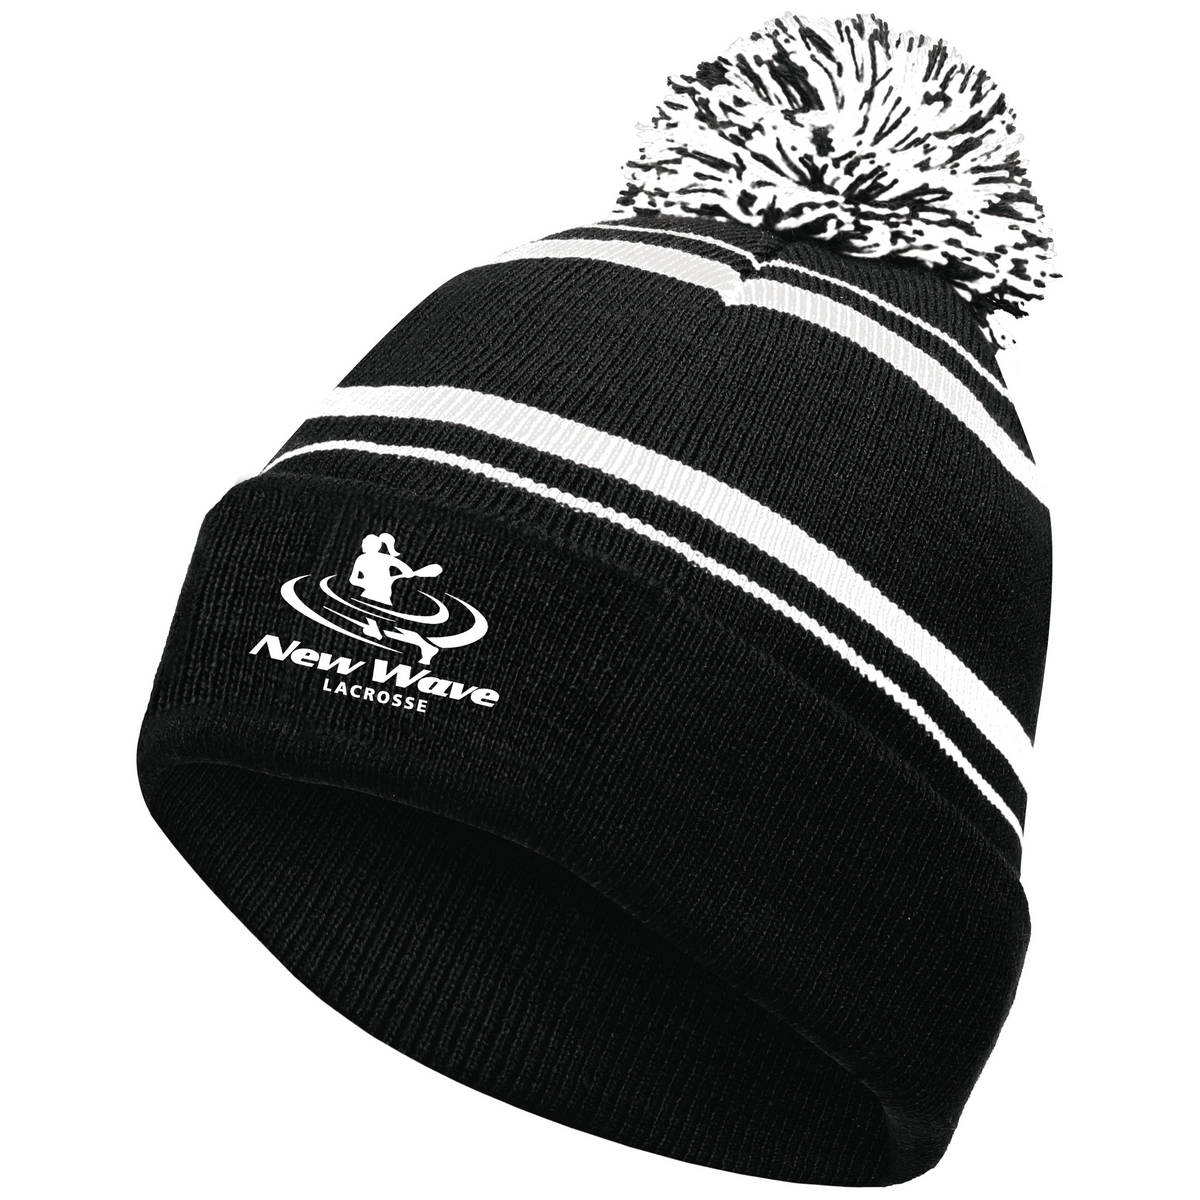 New Wave Girls Lacrosse Homecoming Beanie